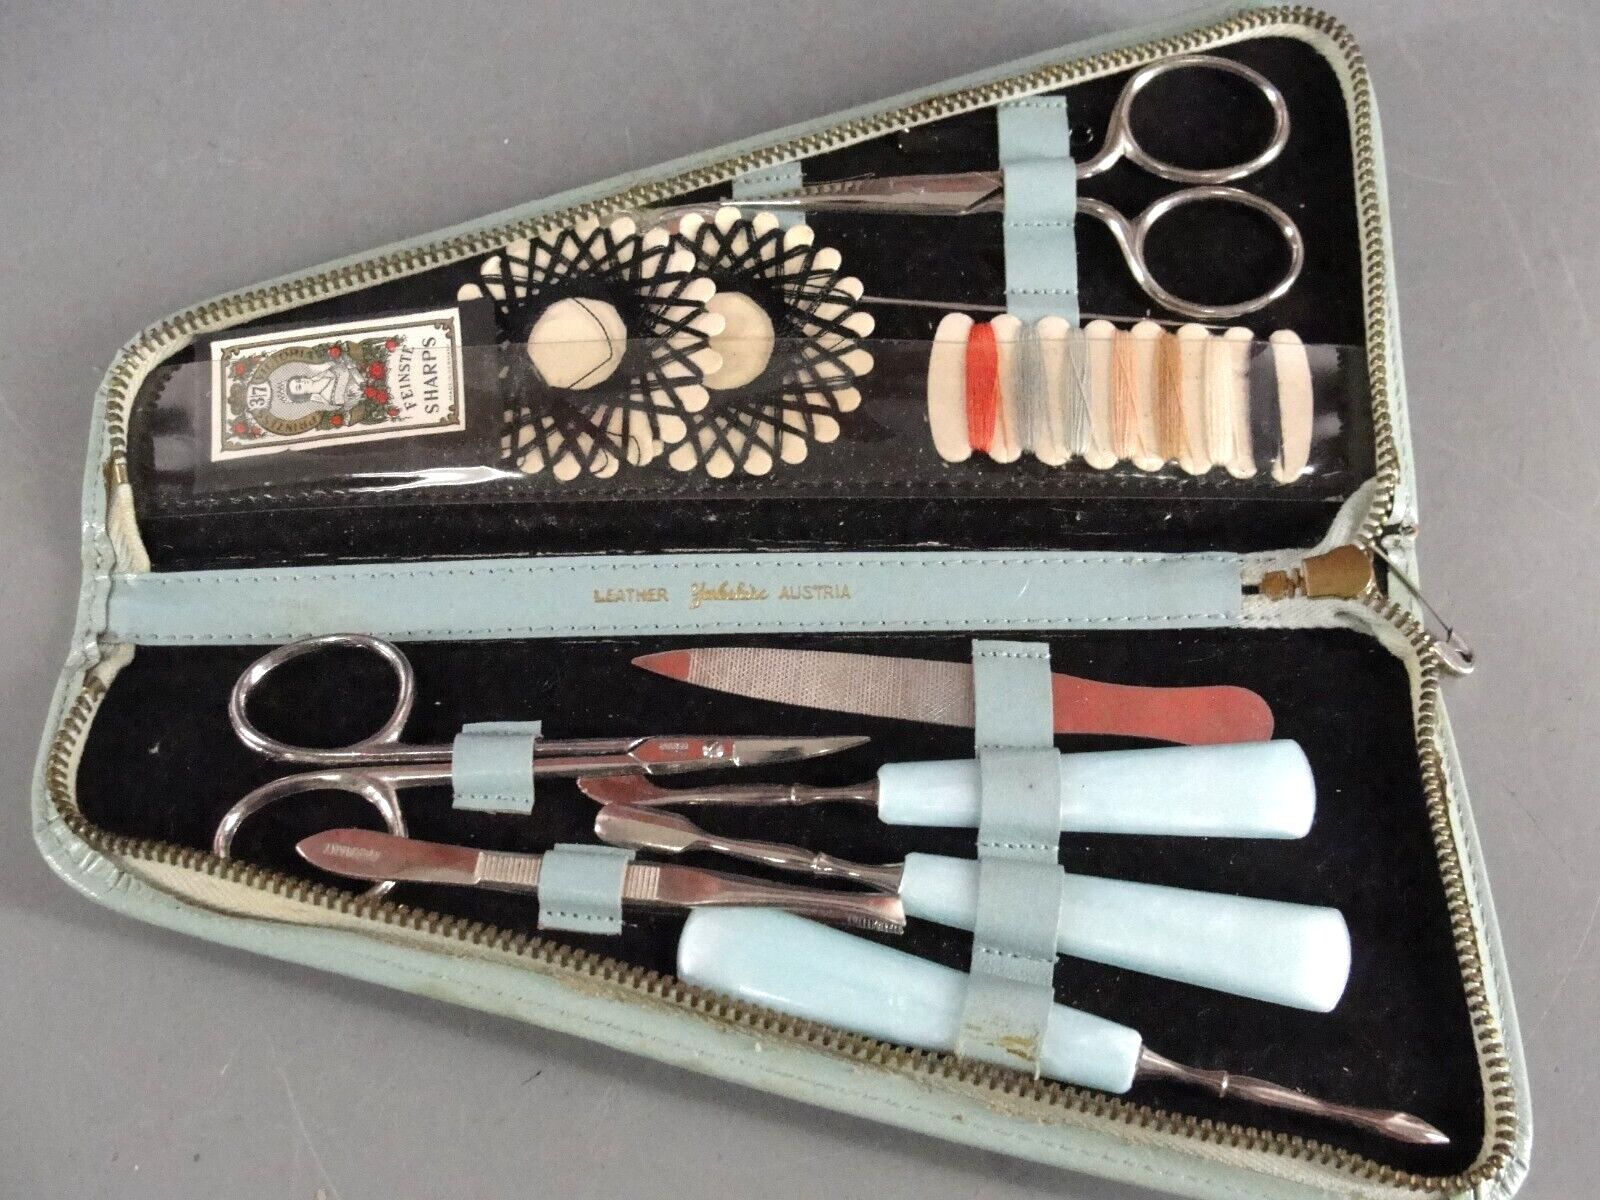 YORKSHIRE VANITY MANICURE NAIL SEWING TRAVEL KIT LEATHER CASE AUSTRIA ANTIQUE